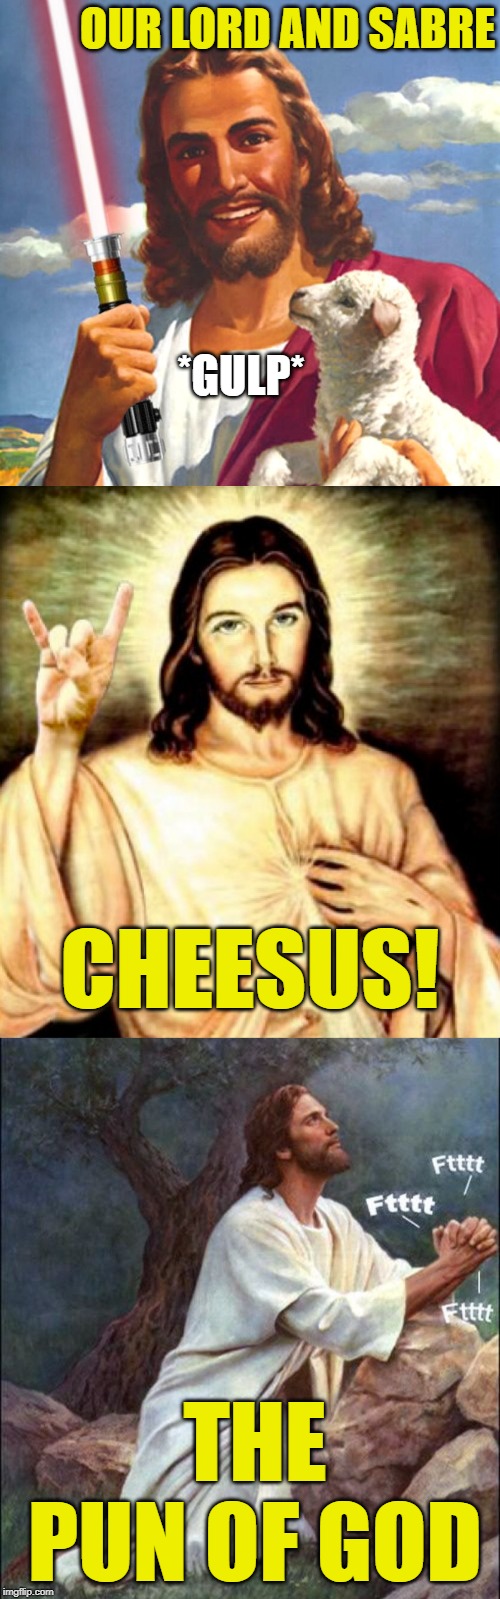 He might be the punniest pun of a bicch on flip... God knows! because I sent him;) | OUR LORD AND SABRE; *GULP*; CHEESUS! THE PUN OF GOD | image tagged in lordcheesus,puns,imgflip humor,imgflip community,too funny | made w/ Imgflip meme maker